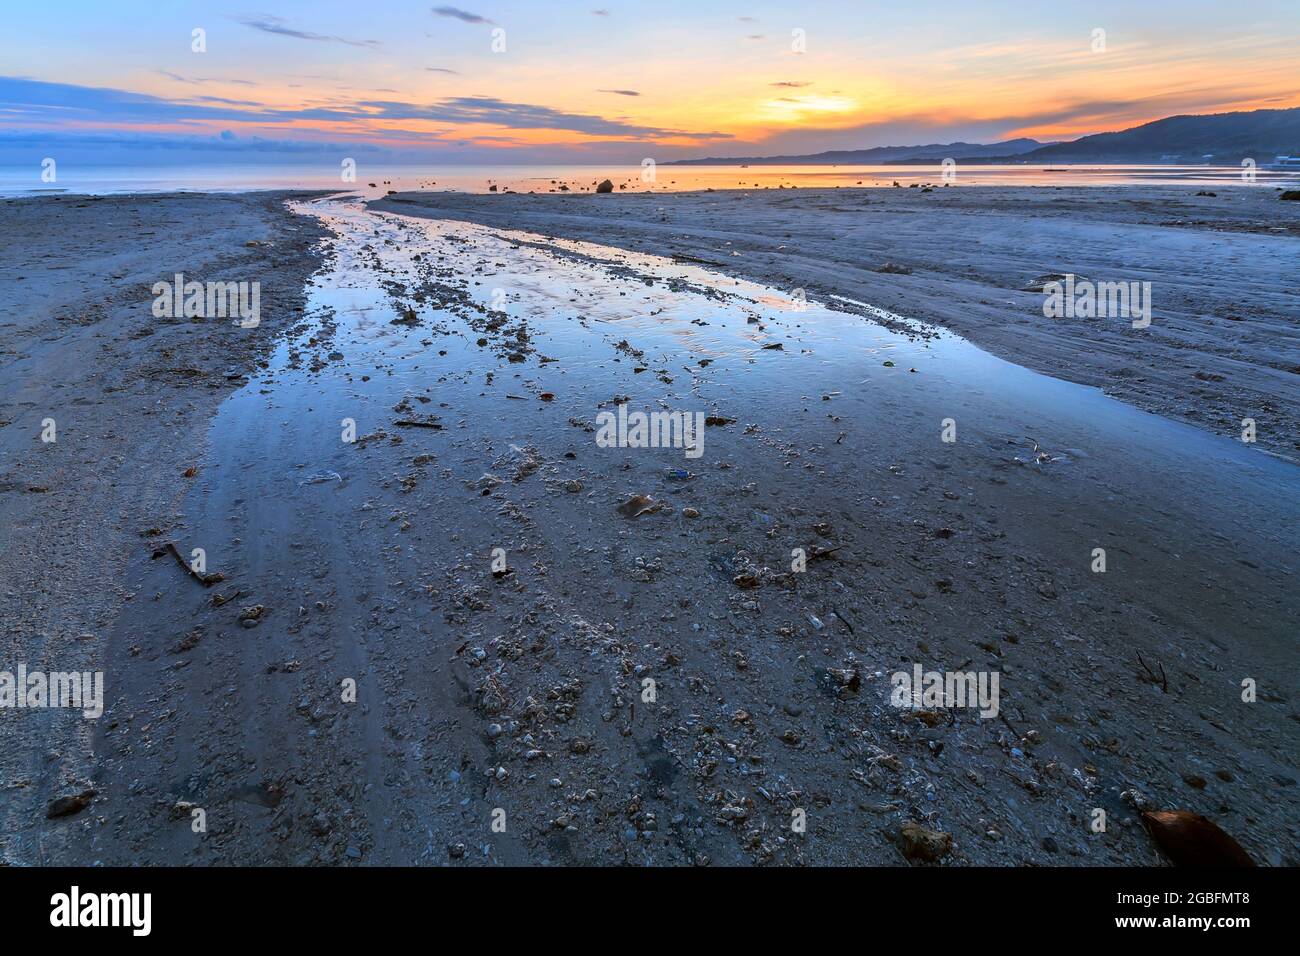 a sandy beach next to a body of water Stock Photo